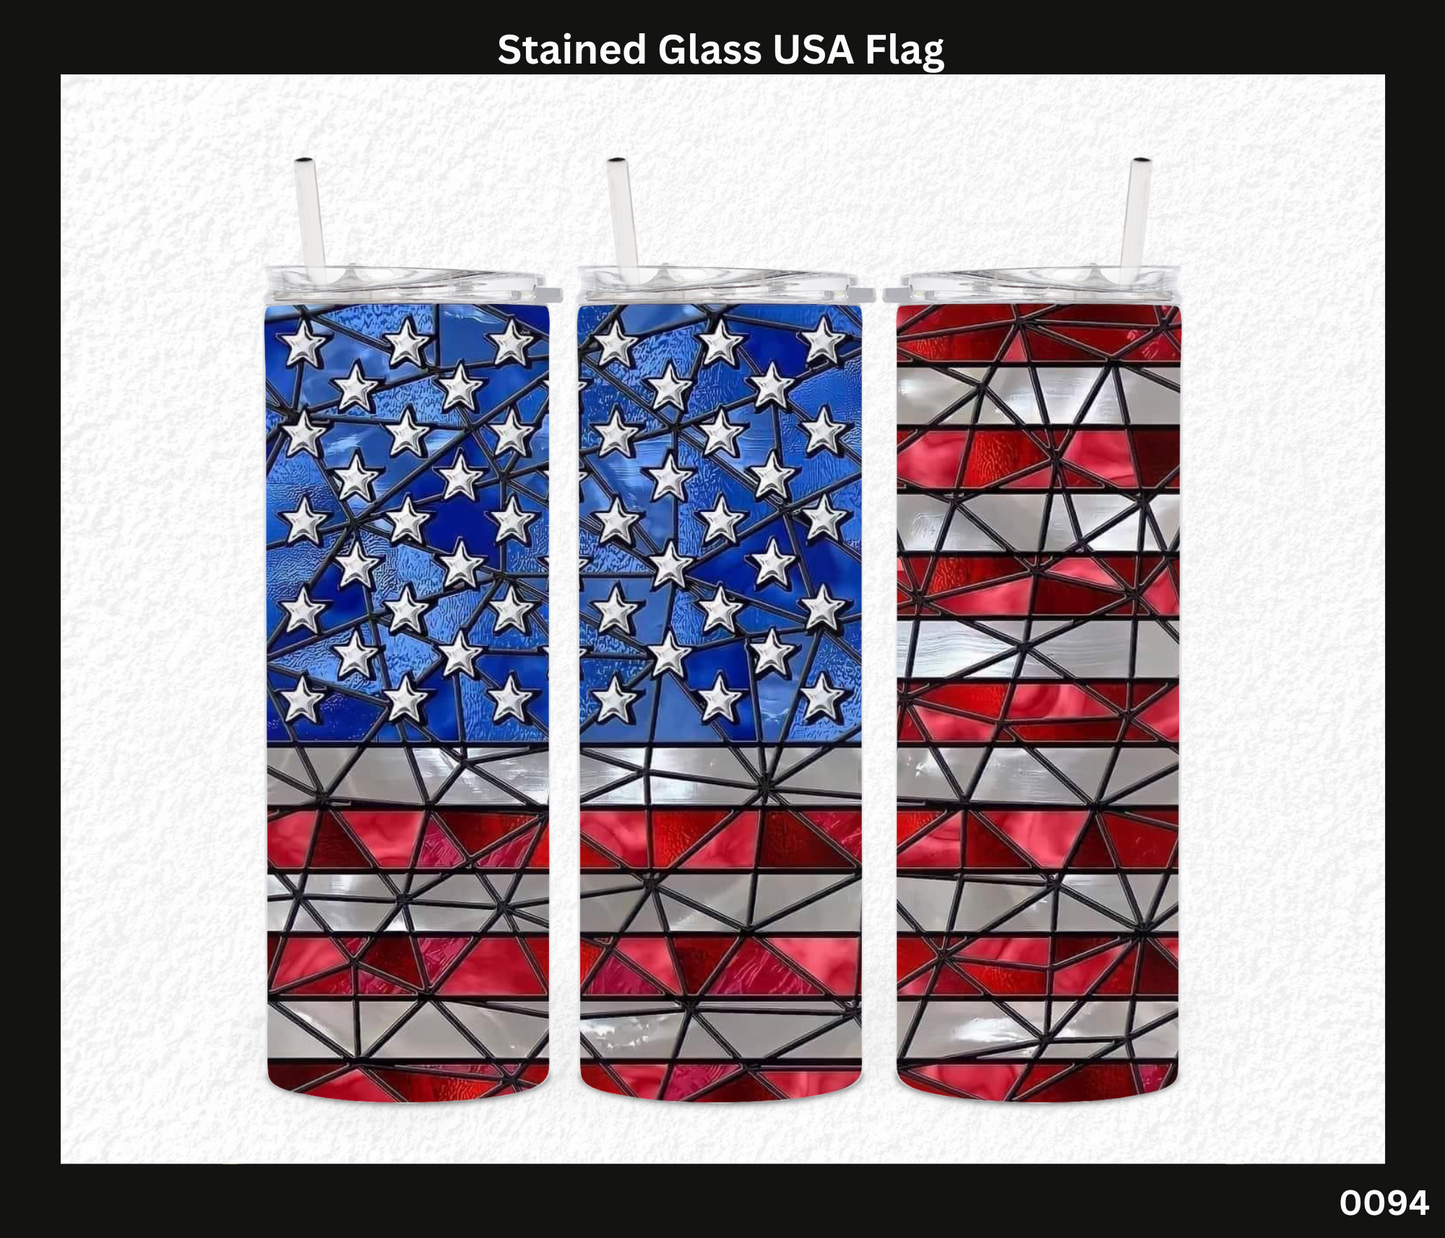 Stained Glass USA Flag